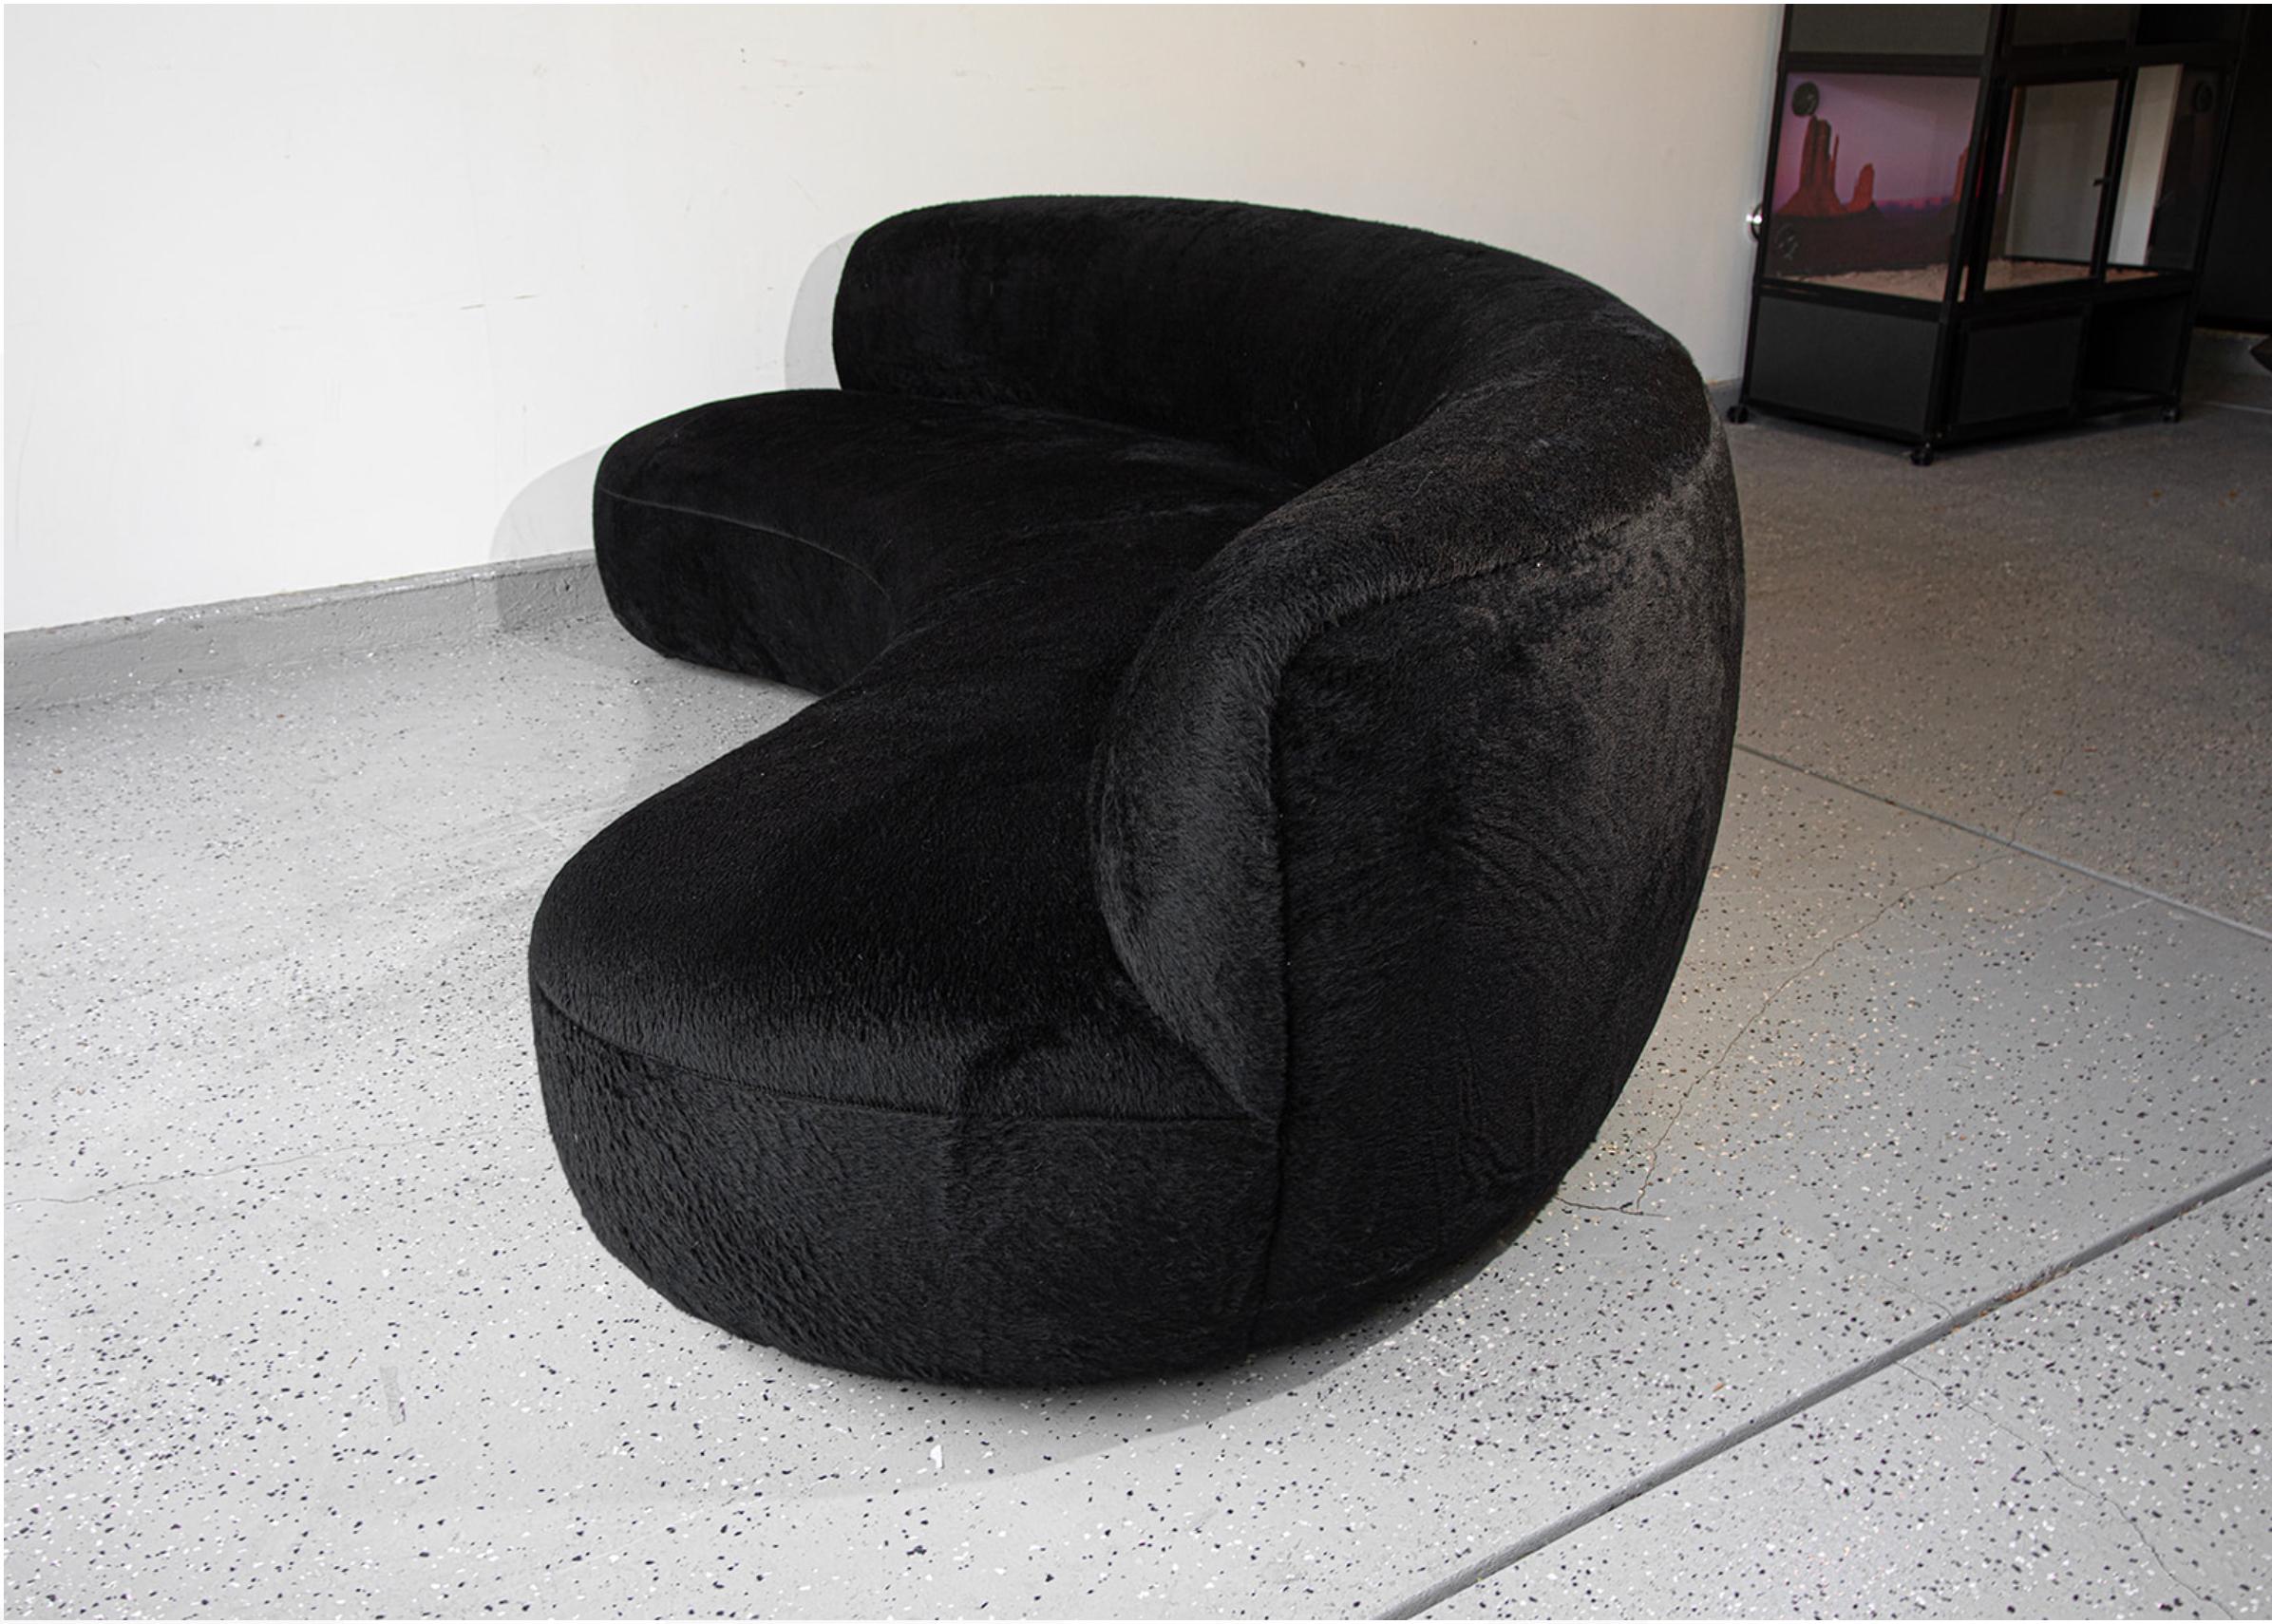 Made from luxurious, soft, black Alpaca wool. Curved organic design. 
Imported from France. Designed by Pierre Augustin Rose. 

This is a custom order sofa that has never been touched, still in original shipping packaging. Lead time is currently